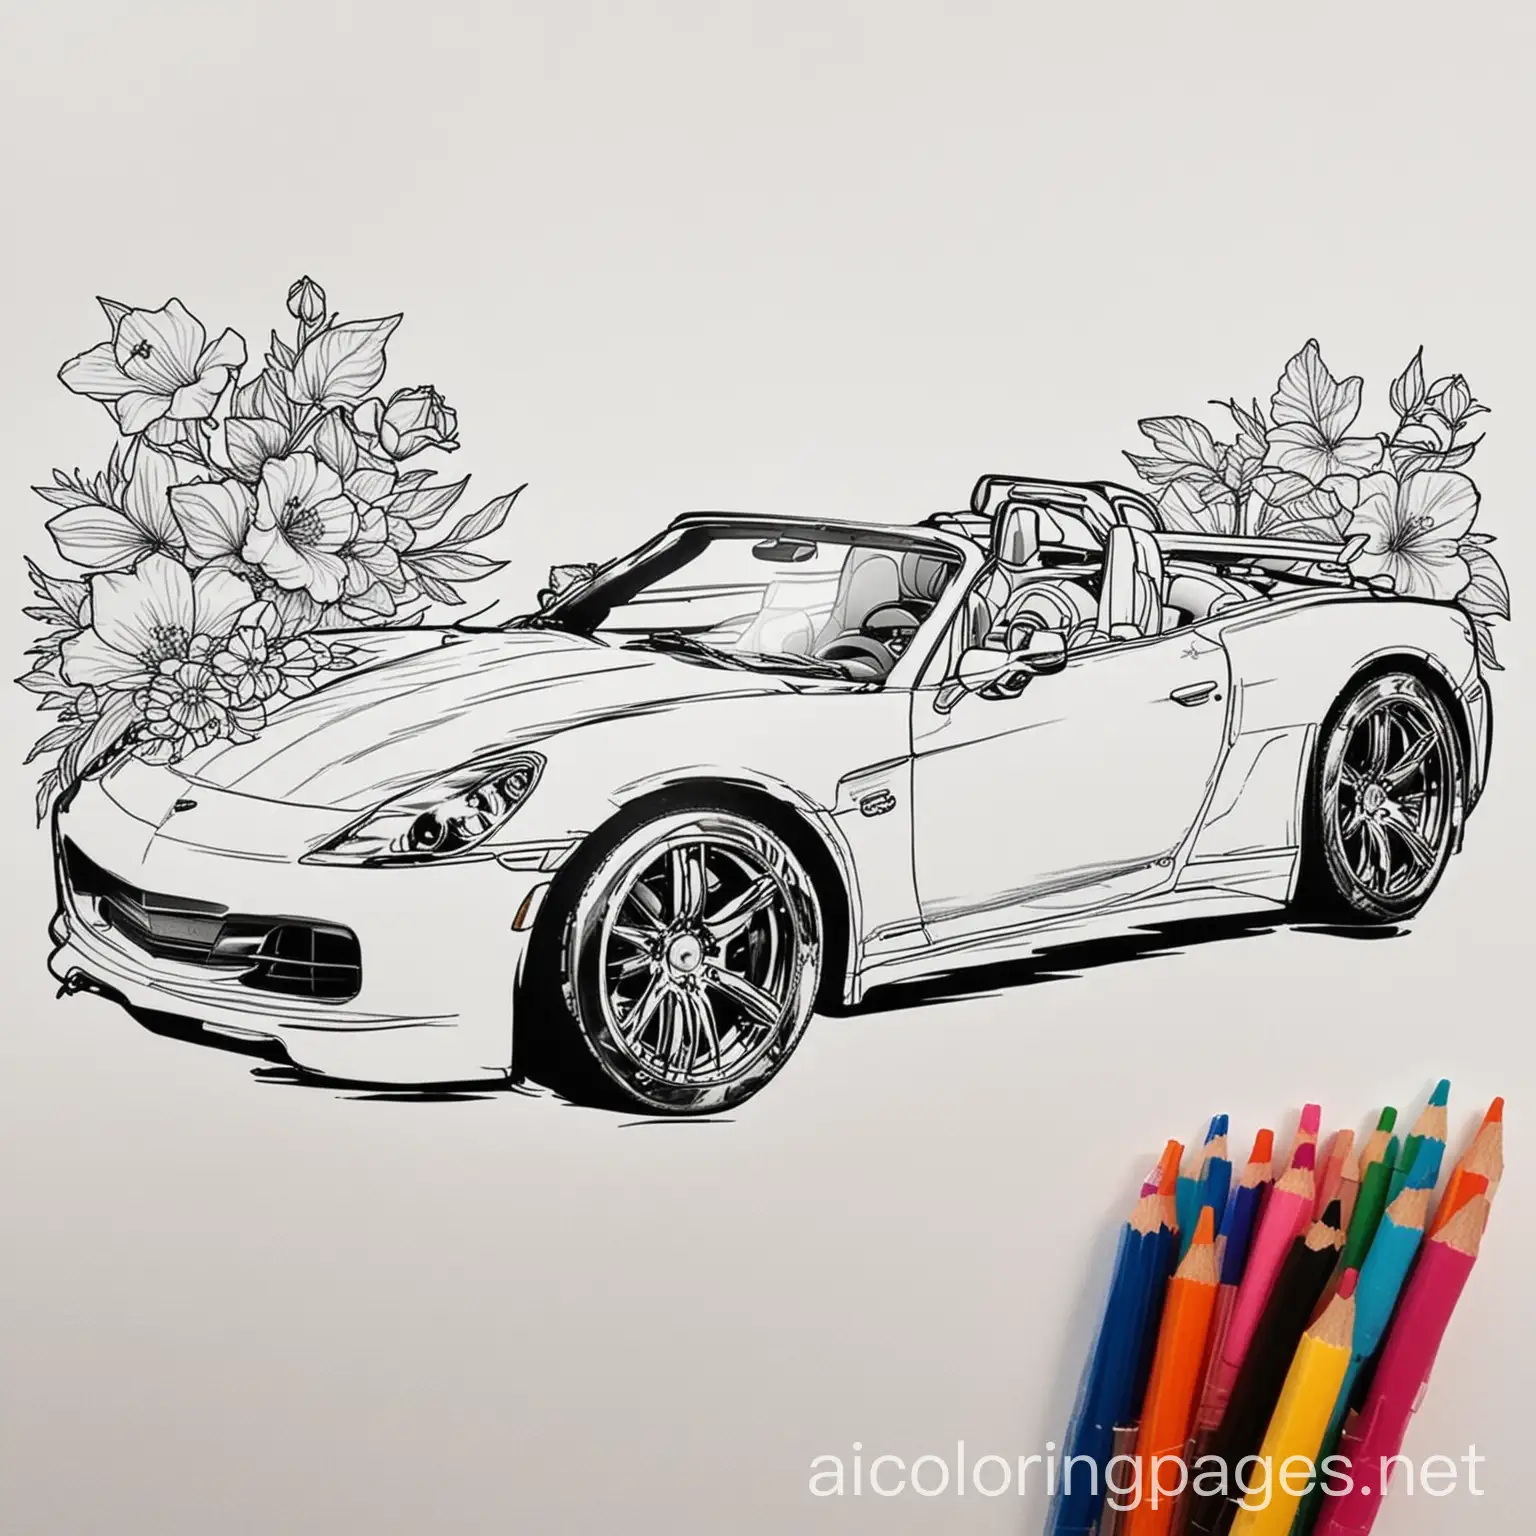 Barbie-Car-Coloring-Page-with-Floral-Design-Black-and-White-Line-Art